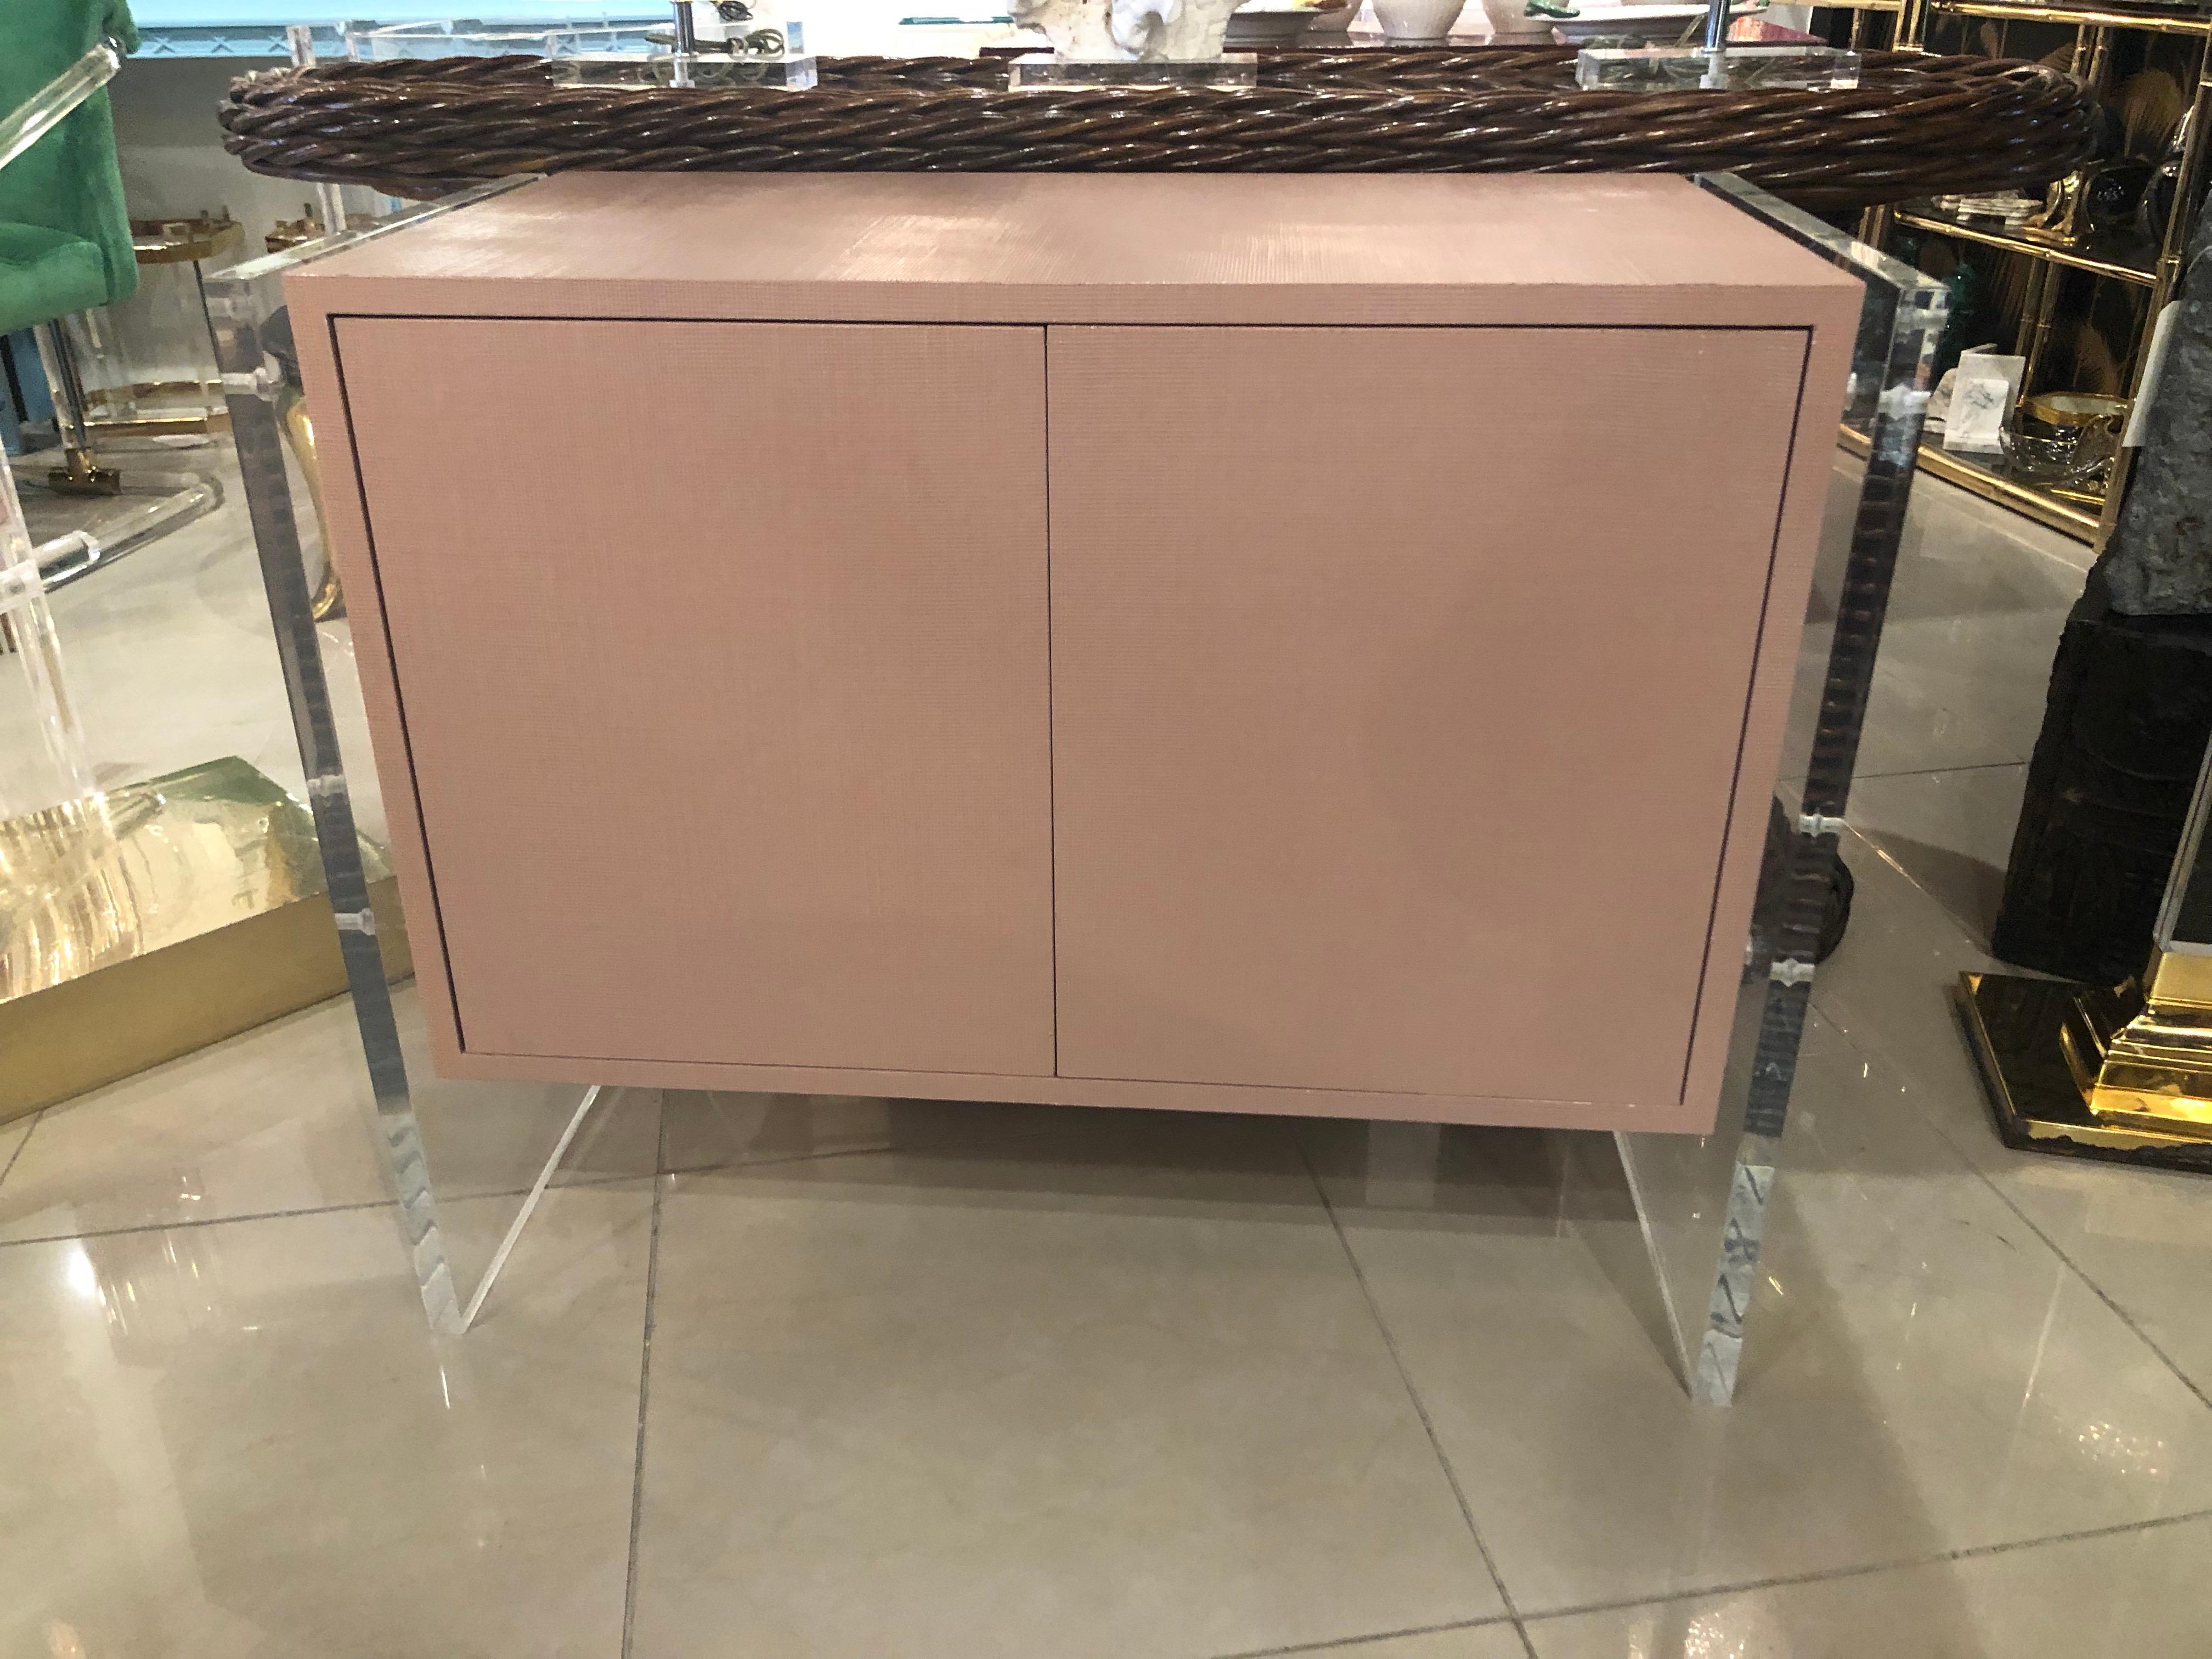 Vintage grasscloth credenza with Lucite sides. One shelf behind the double doors. The lacquered surface was as found. Can be lacquered in another color if desired for an additional cost.